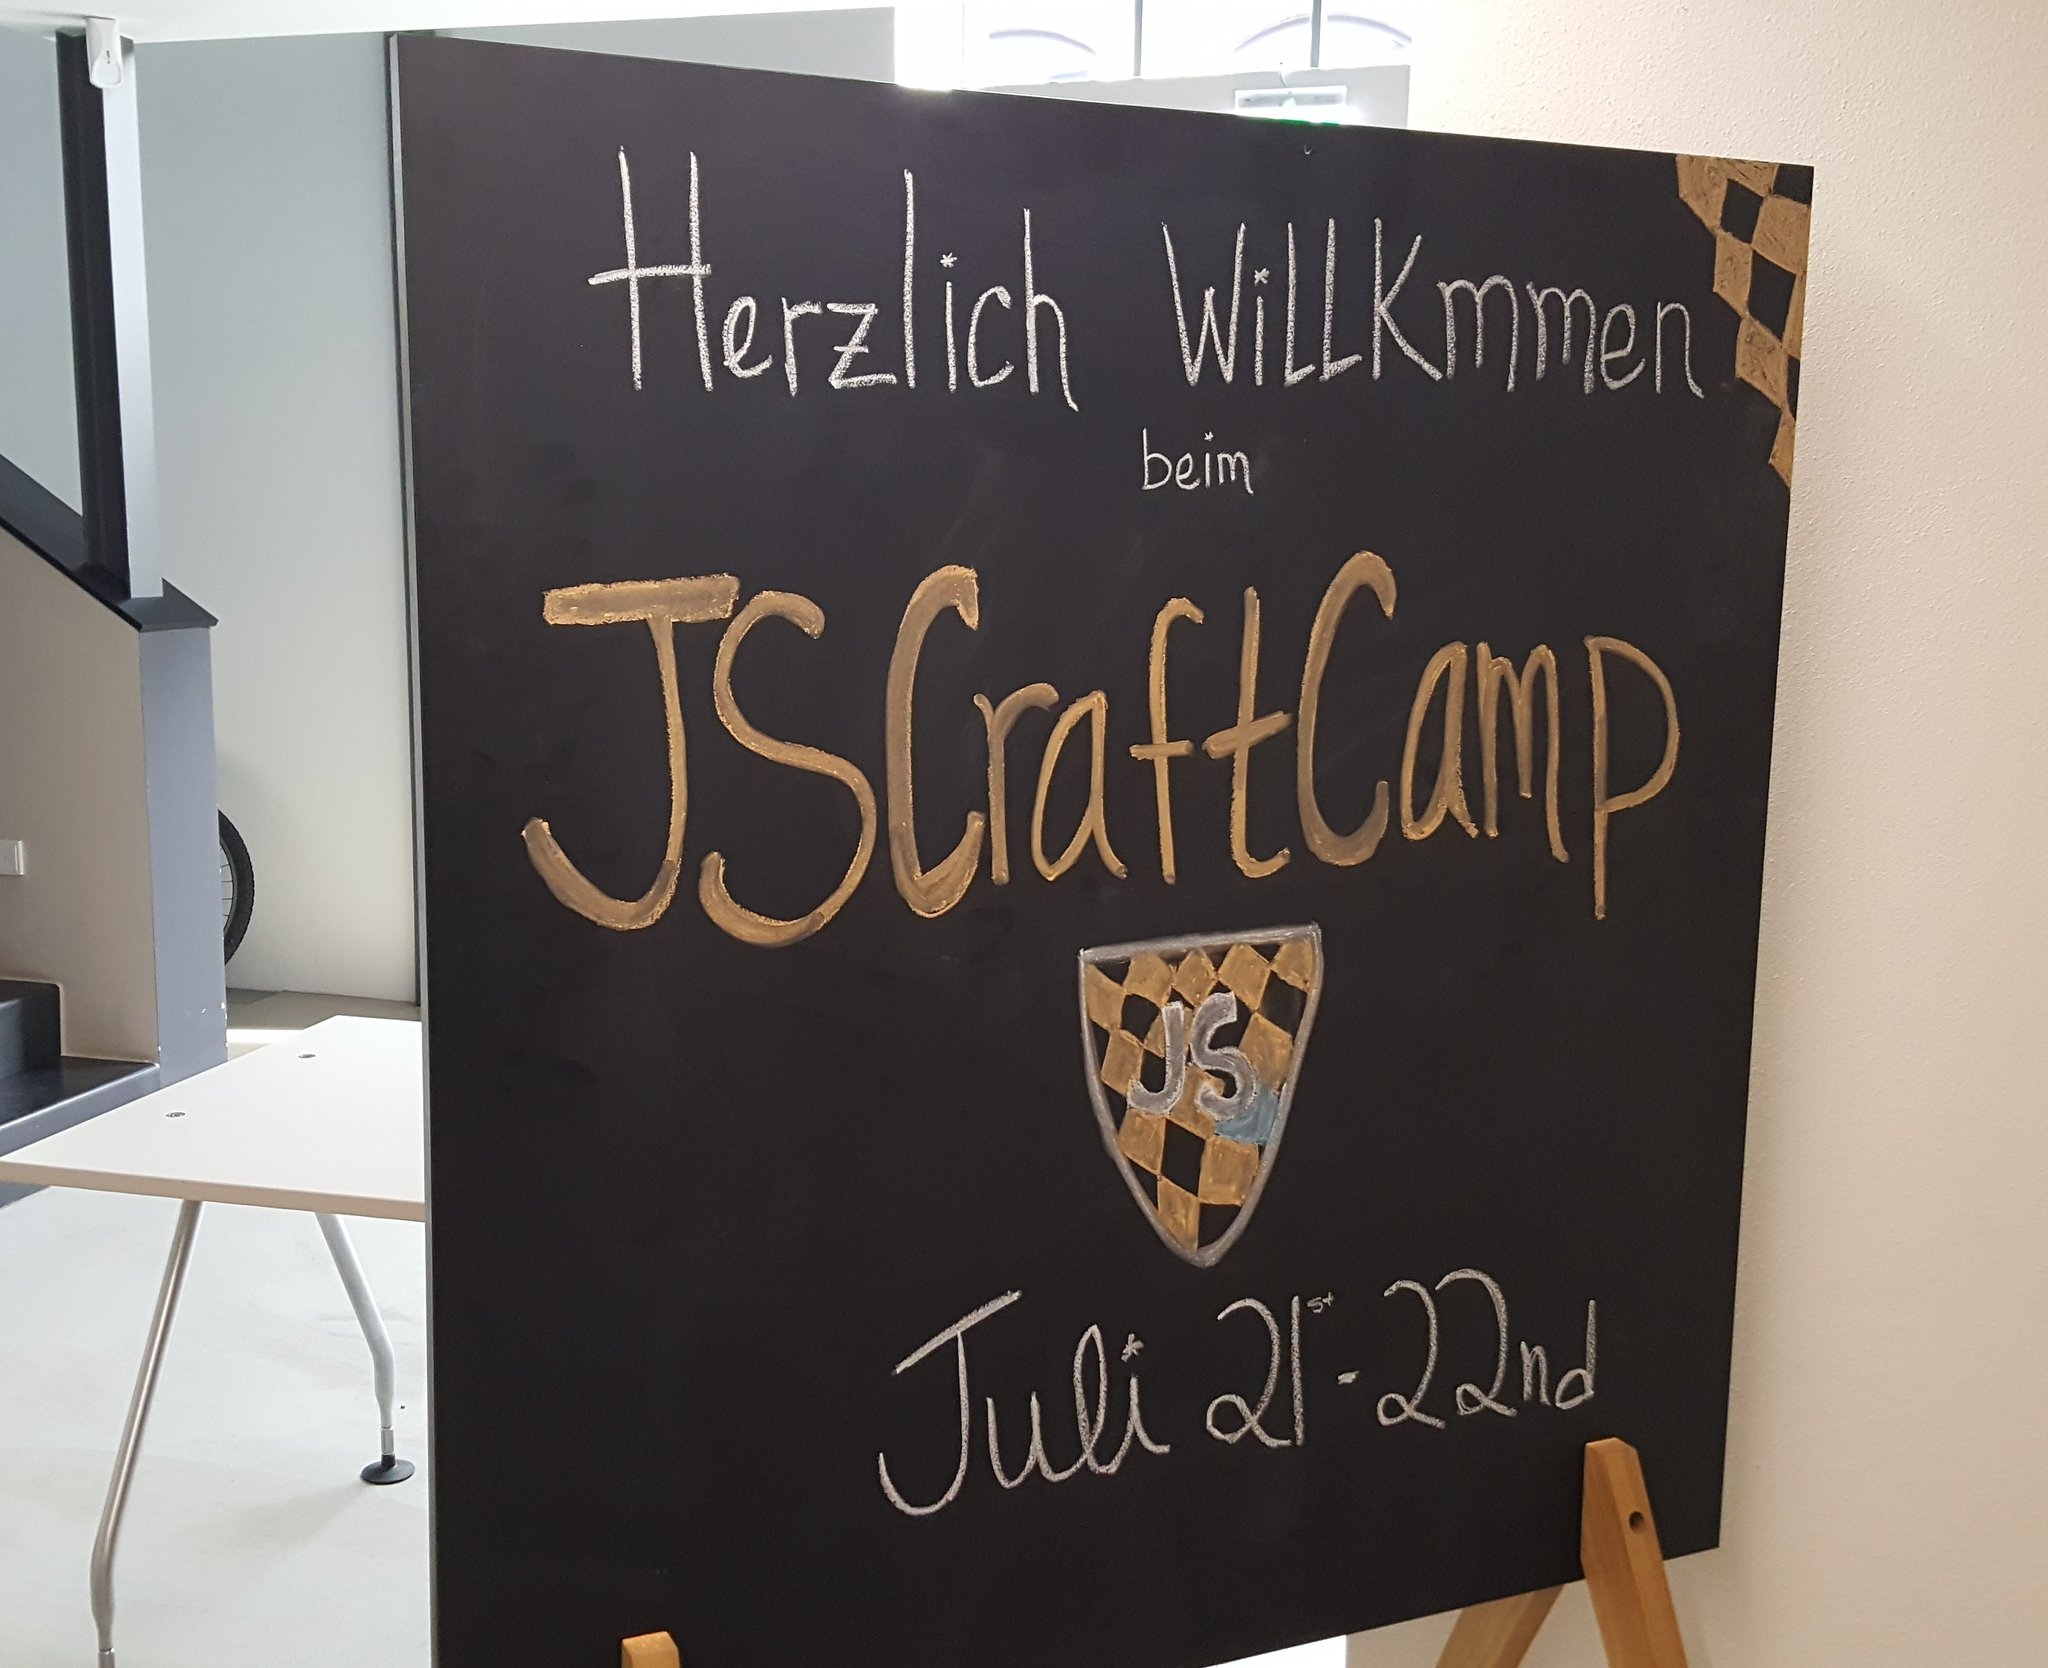 Impression 13 of 91 from JSCraftCamp 2017